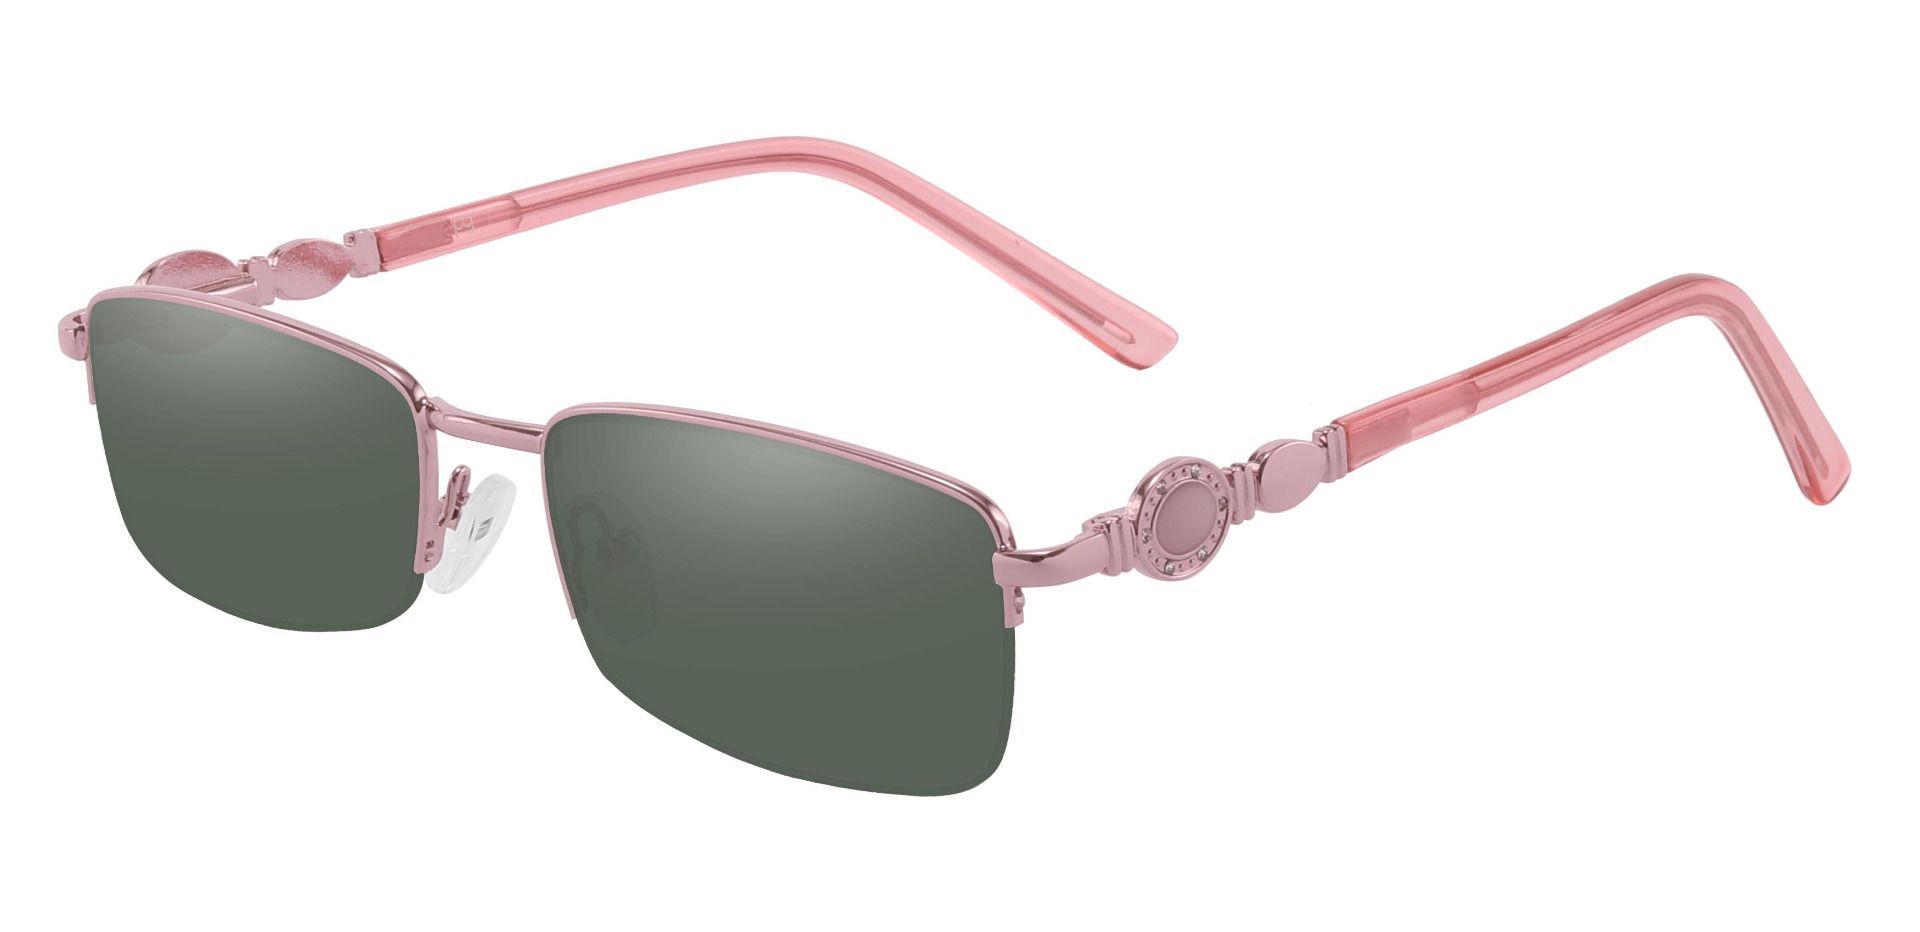 Crowley Rectangle Non-Rx Sunglasses - Pink Frame With Green Lenses